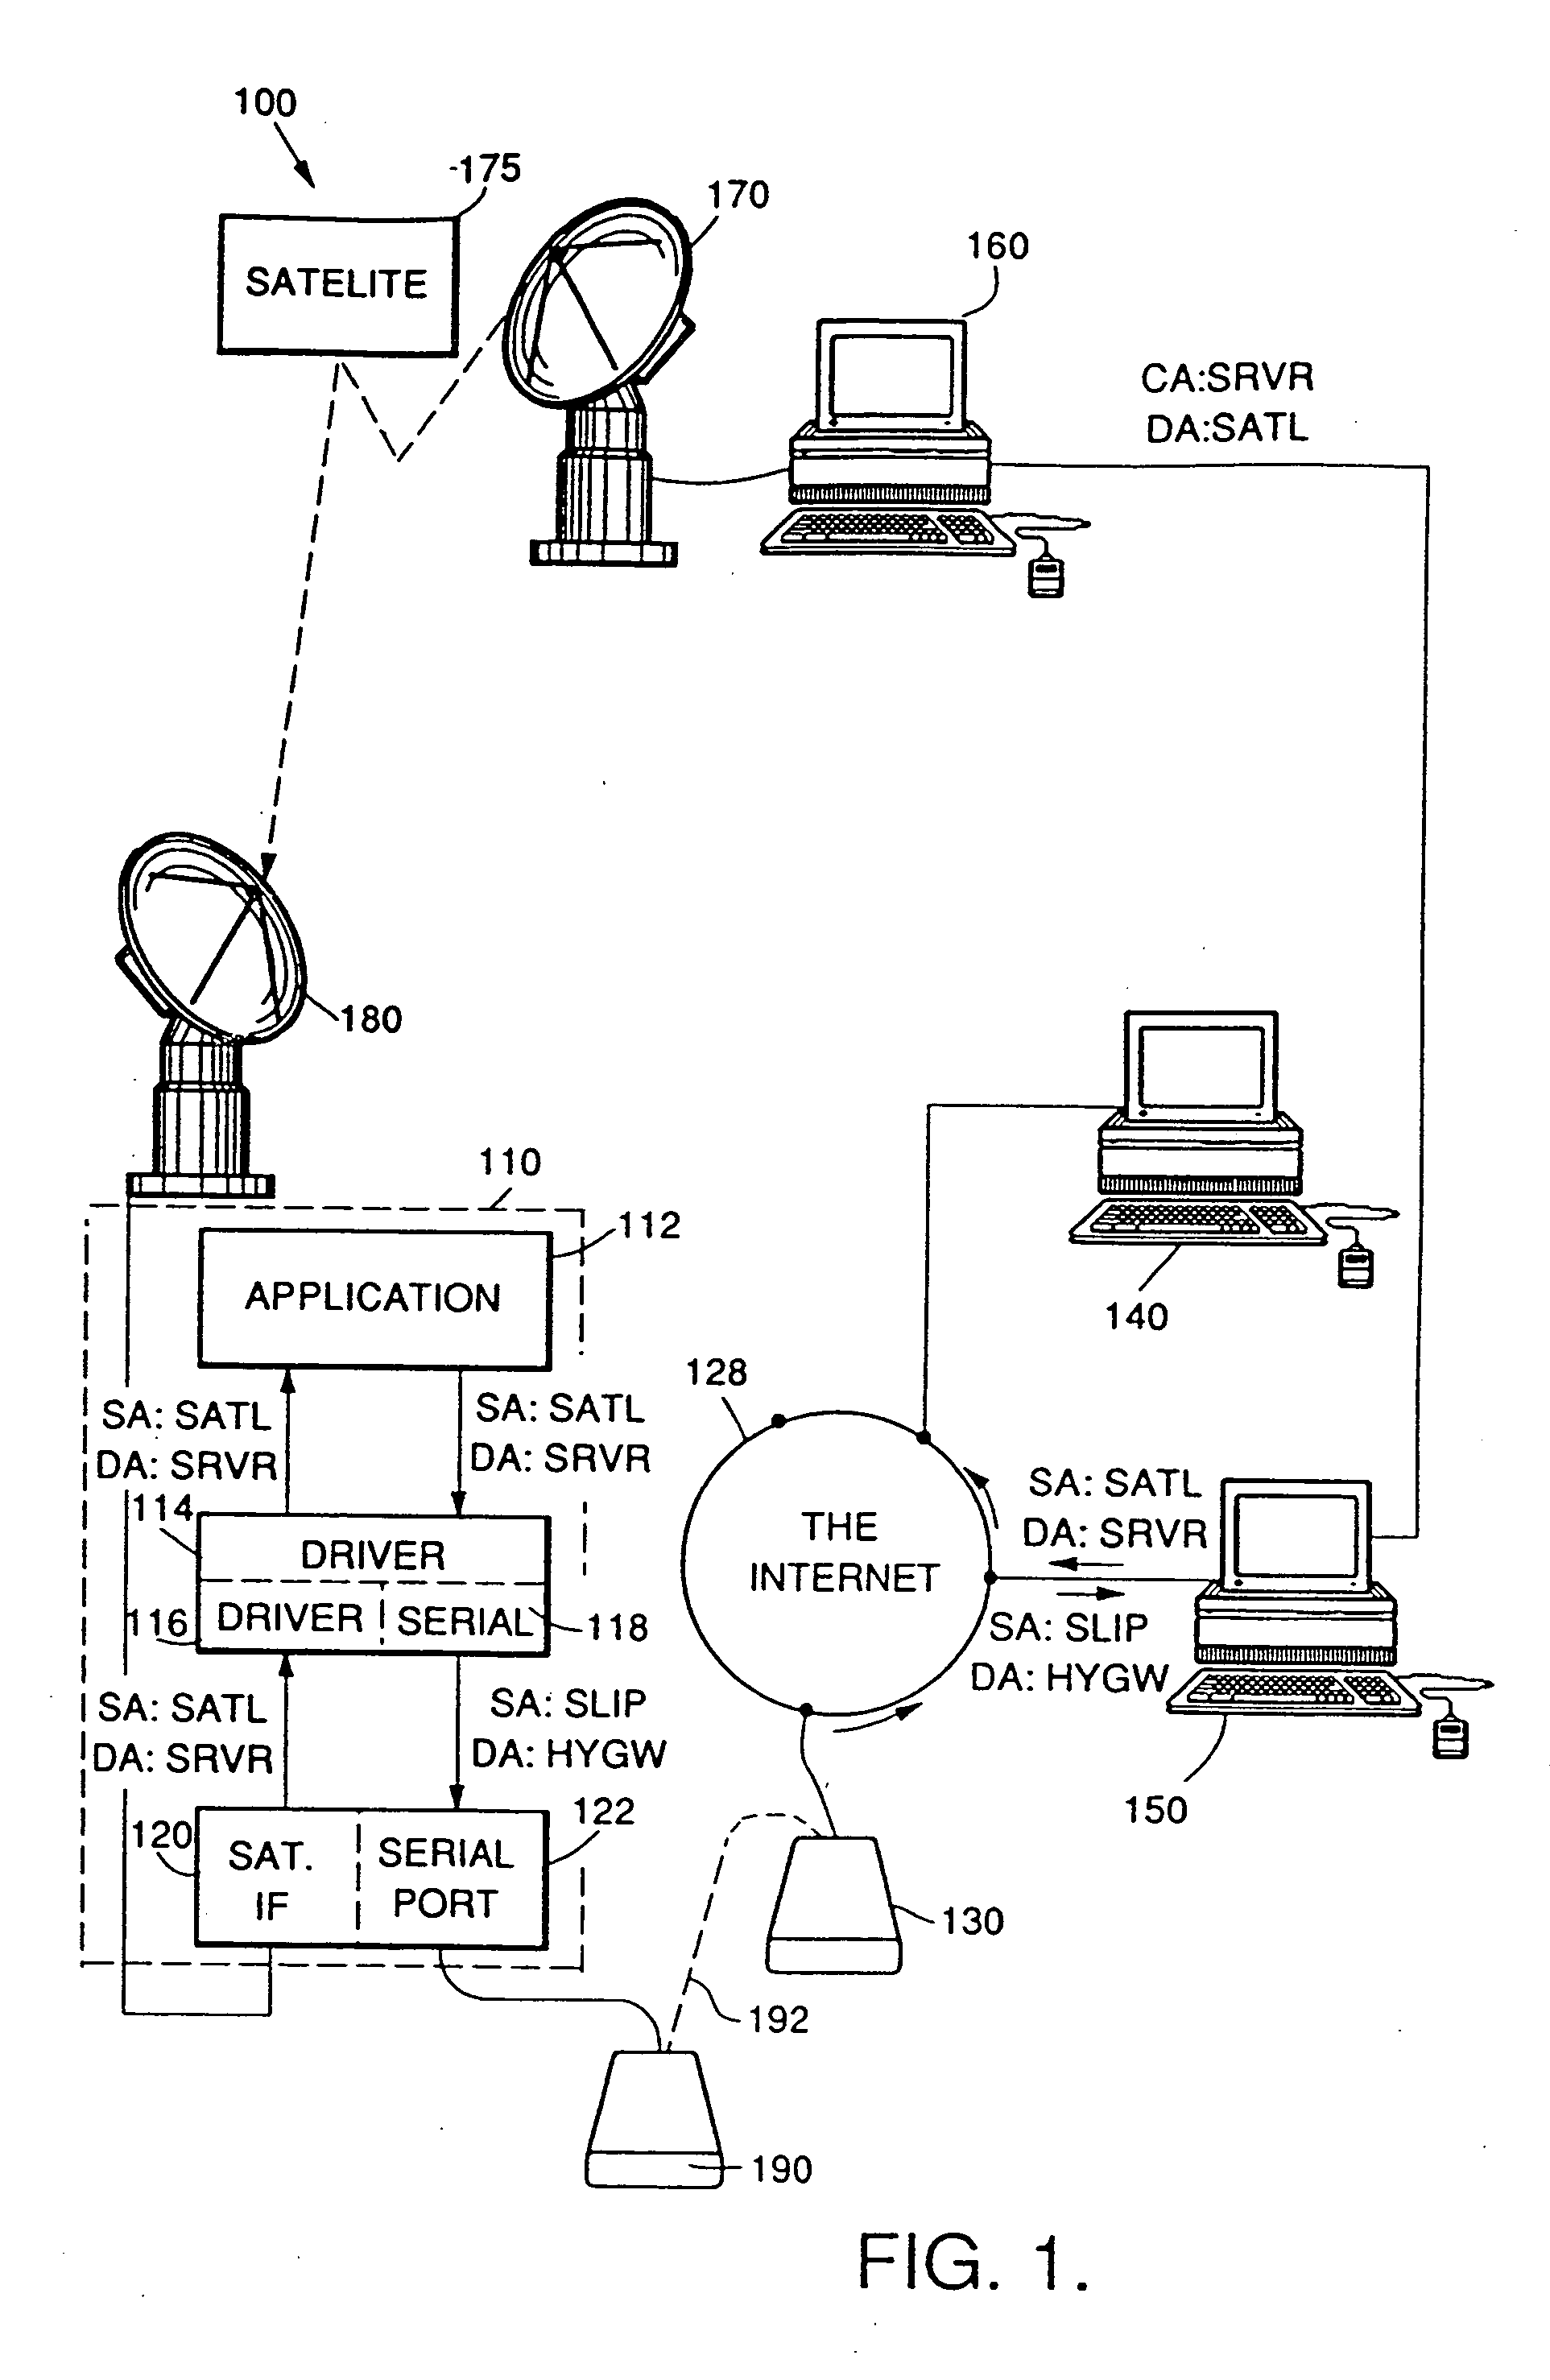 Apparatus and method for hybrid network access